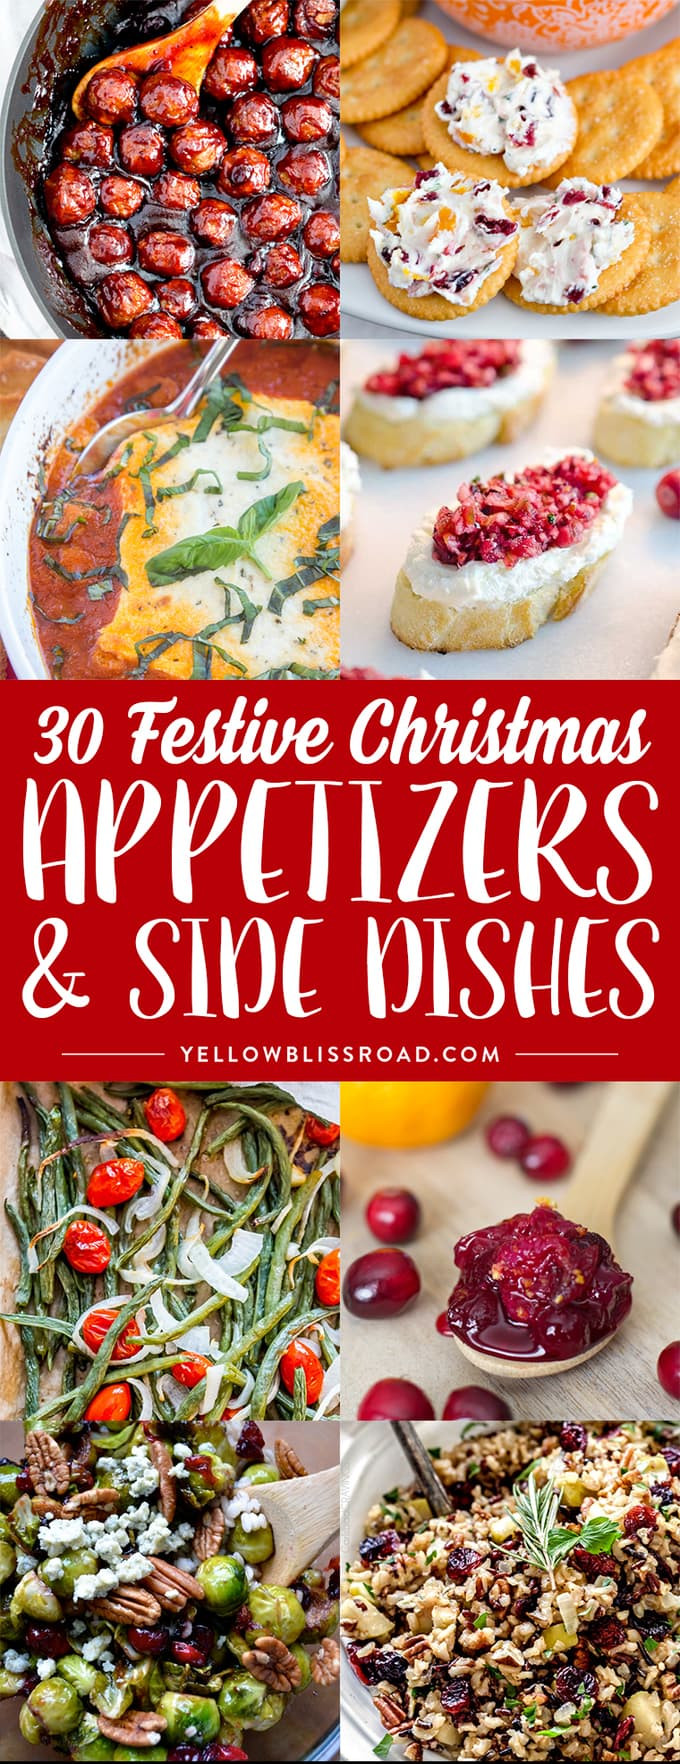 Festive Christmas Appetizers
 Festive Christmas Appetizers and Sides Yellow Bliss Road